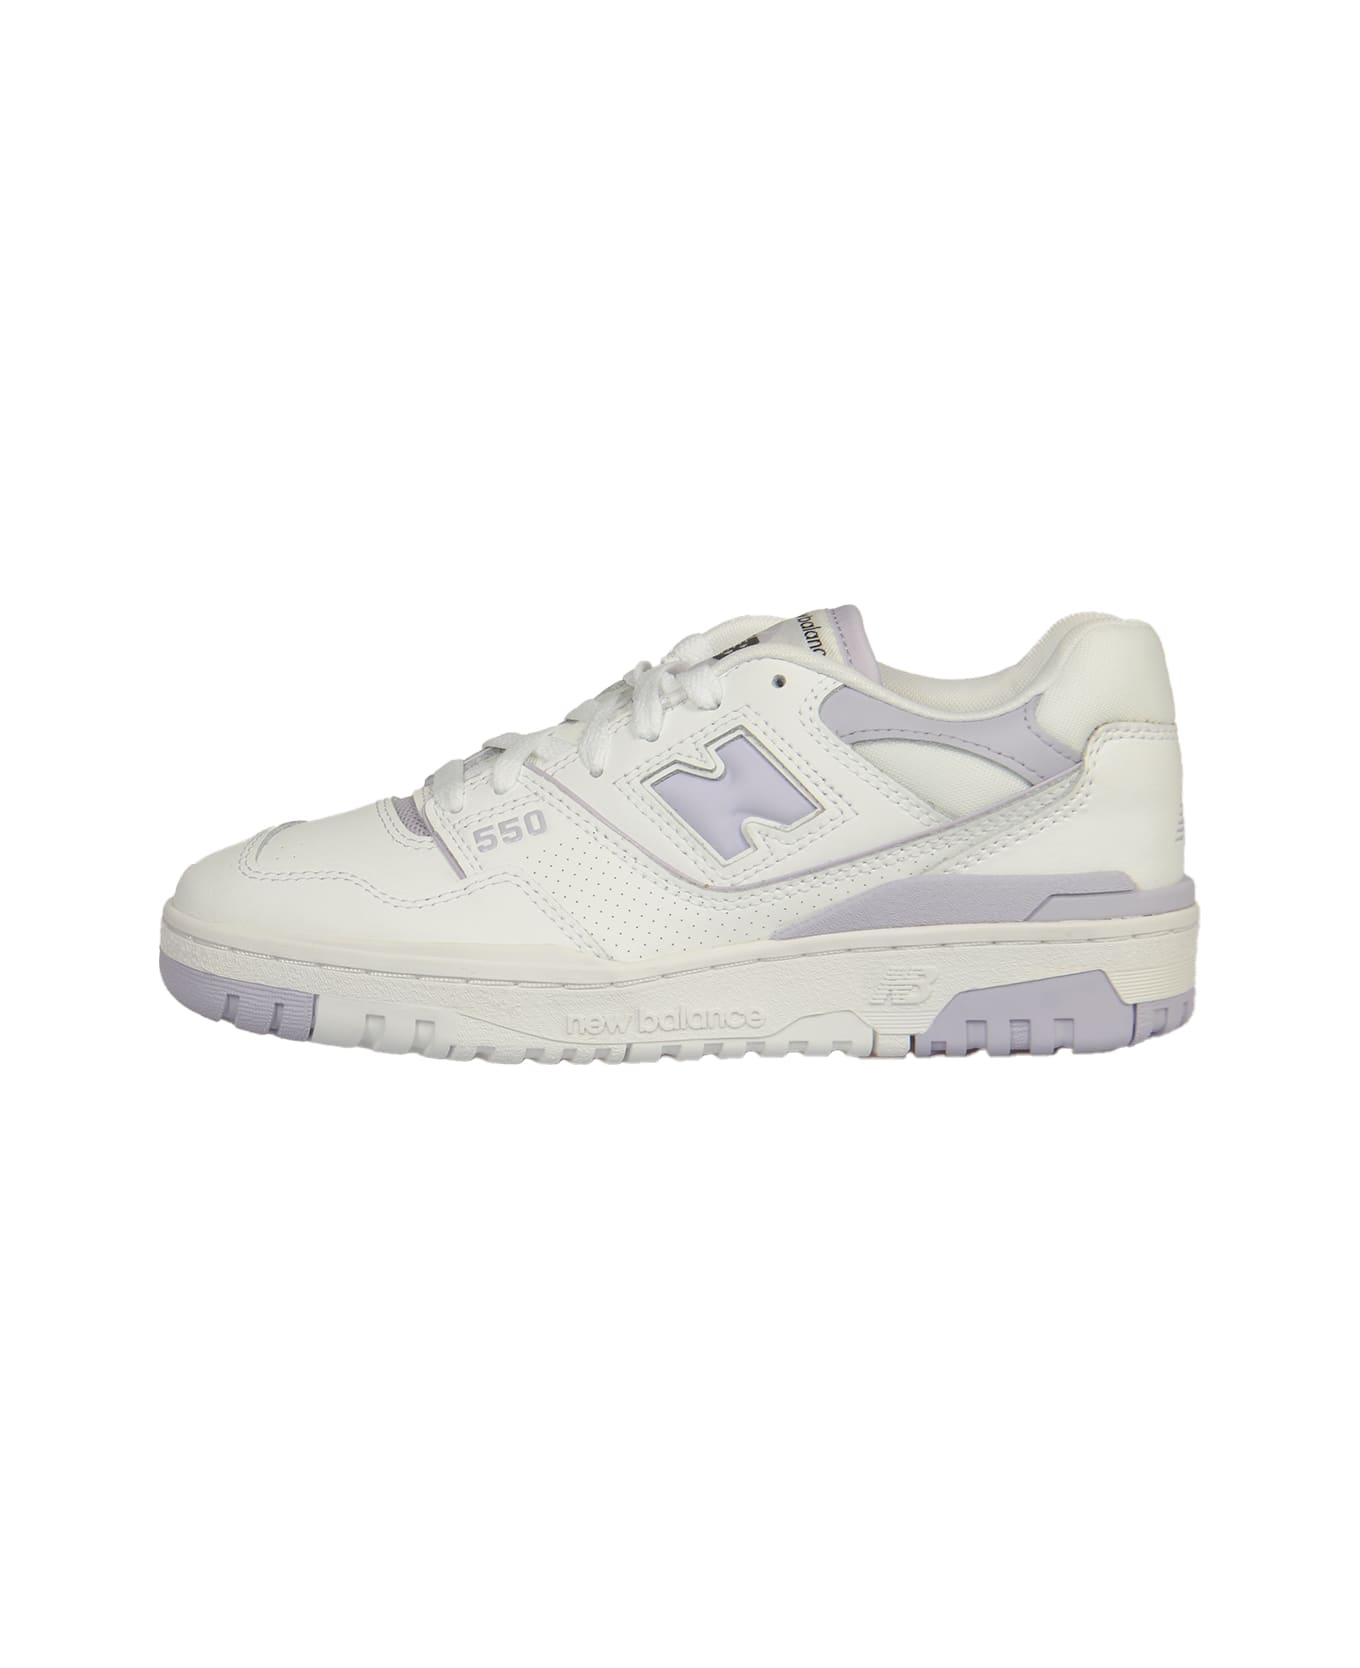 New Balance Logo Sided 550 Sneakers